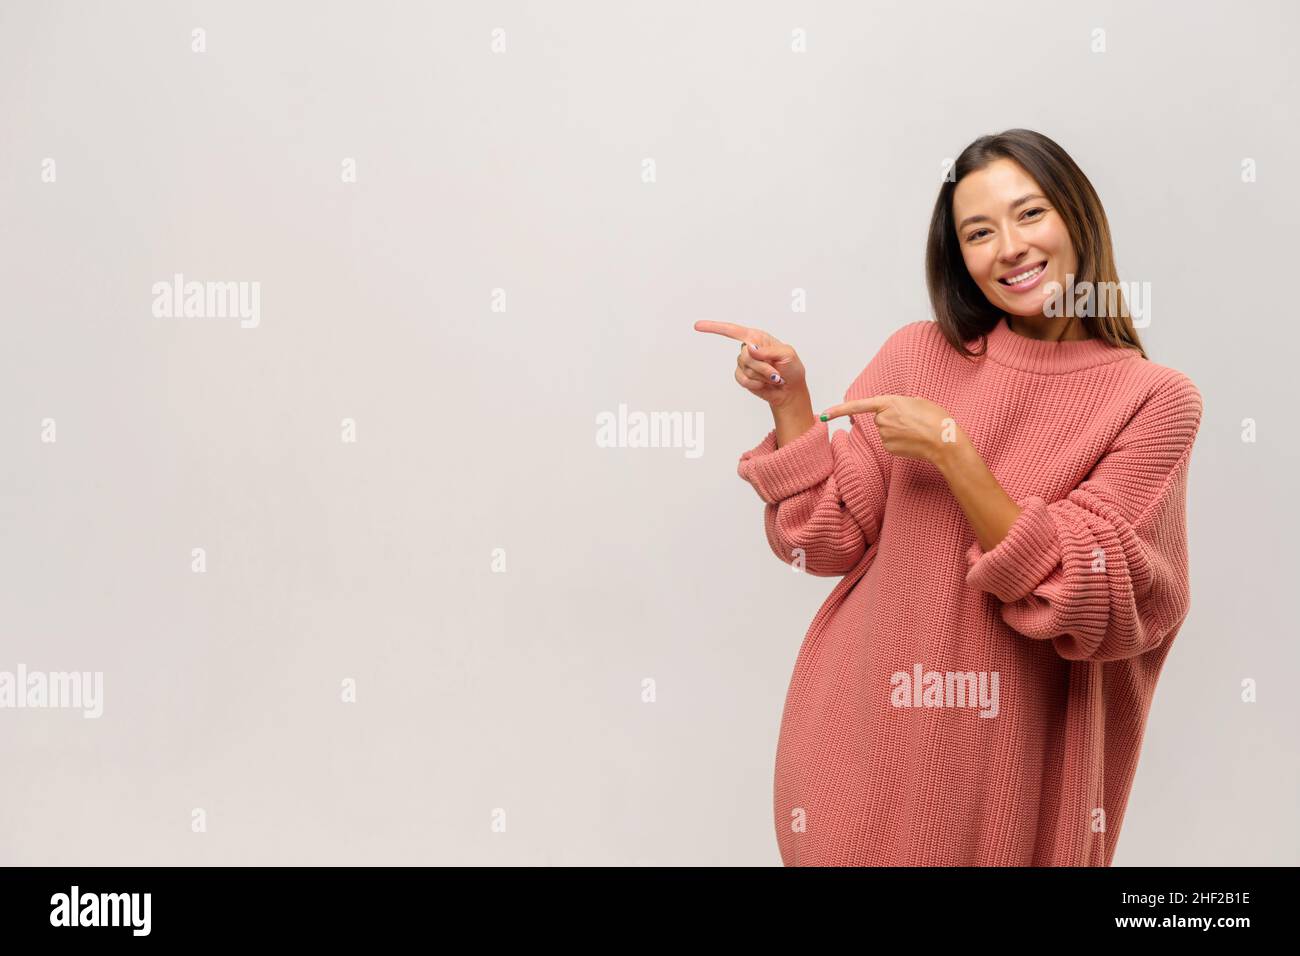 Asian woman pointing aside with fingers, having happy facial expression. Indoor studio shot isolated on white background Stock Photo